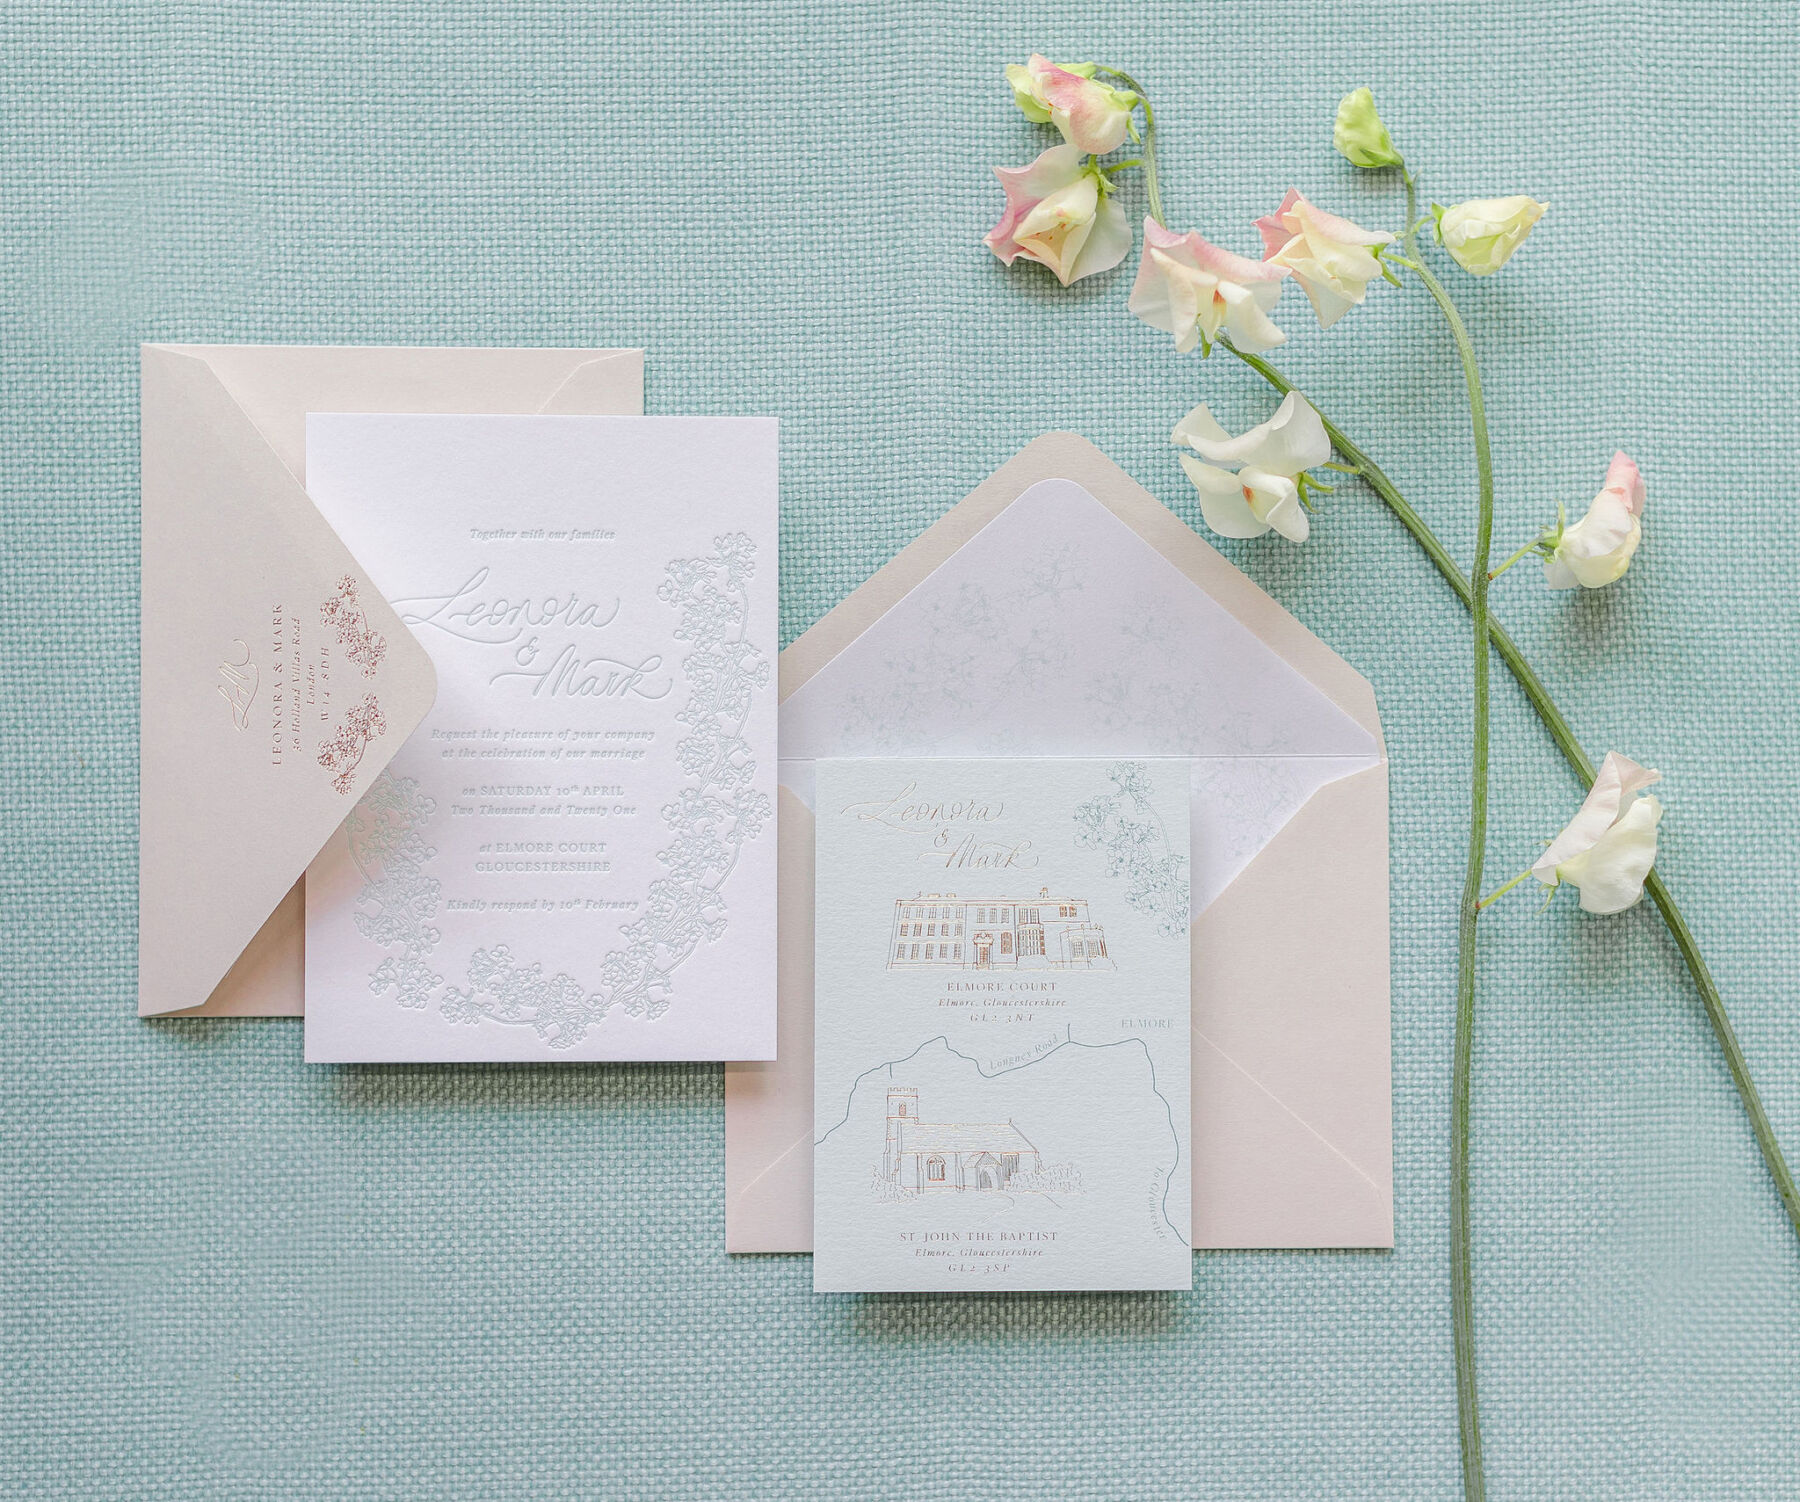 Bespoke wedding invitation suite with invitation card, hand drawn map and envelope liner.